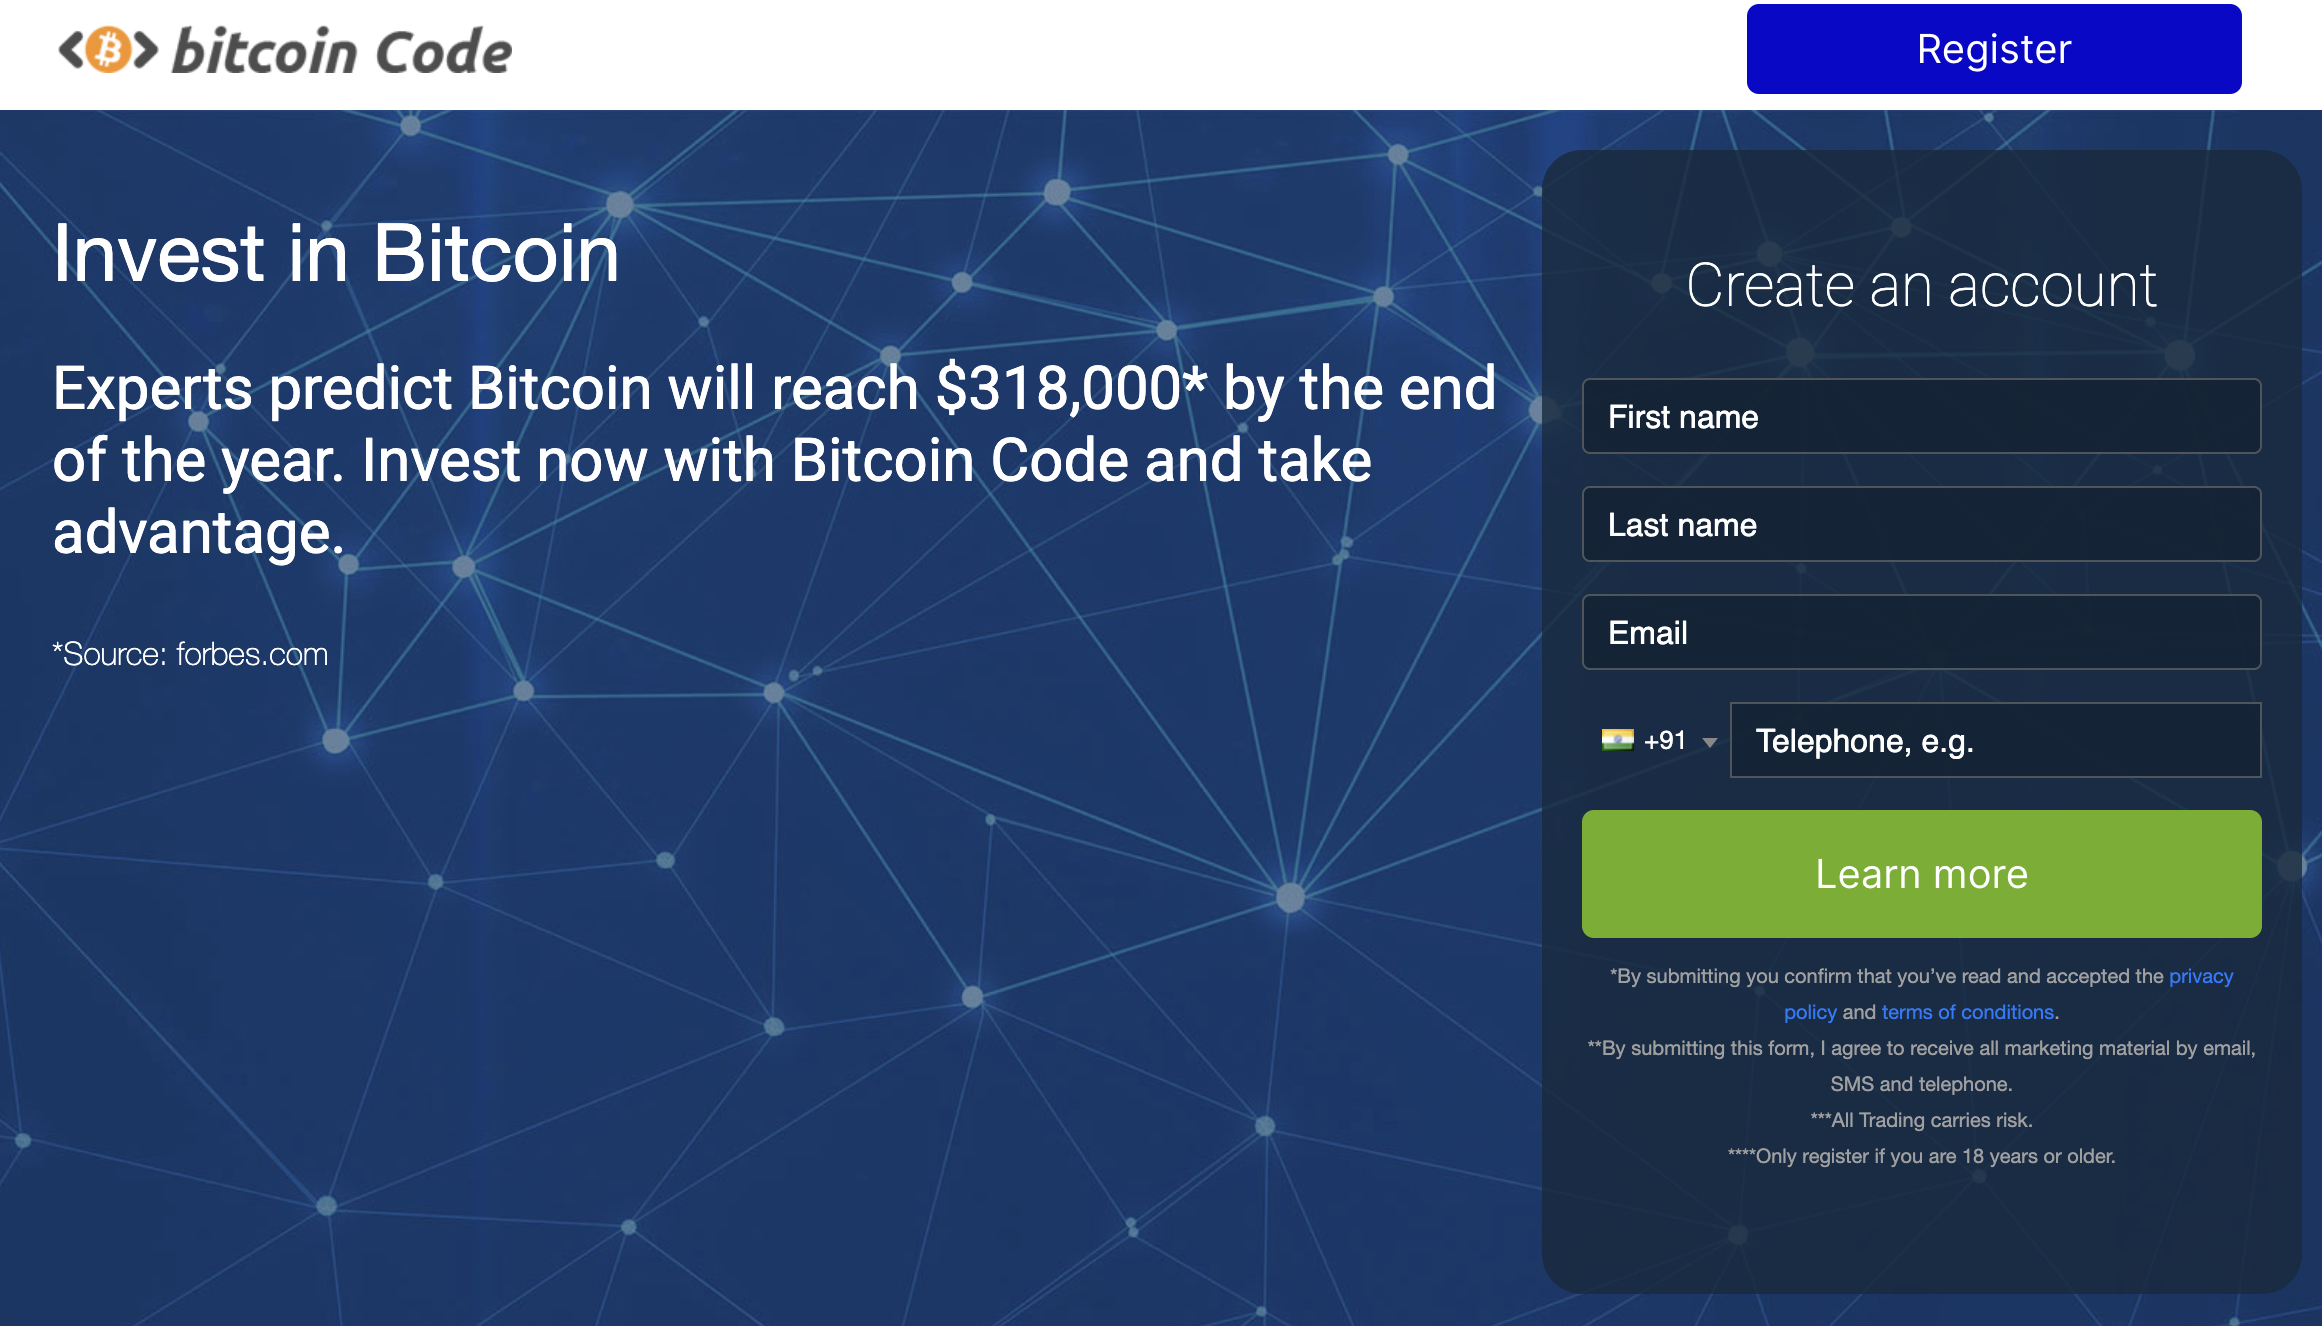 Bitcoin Code Review - Is It a Scam or Legit? Find Out Now!